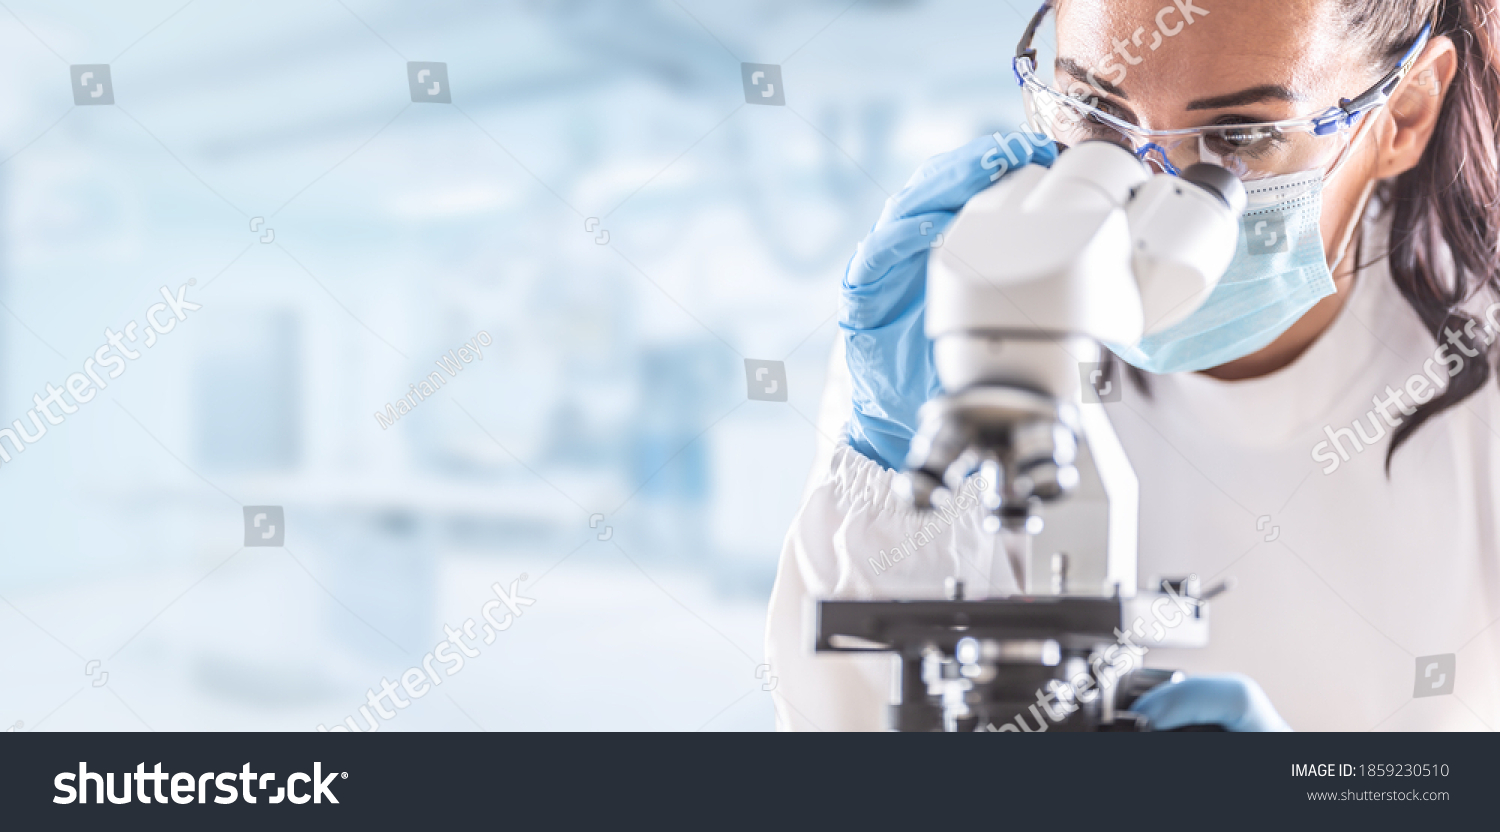 Female lab technician in protective glasses, gloves and face mask sits next to a microscope in laboratory. #1859230510